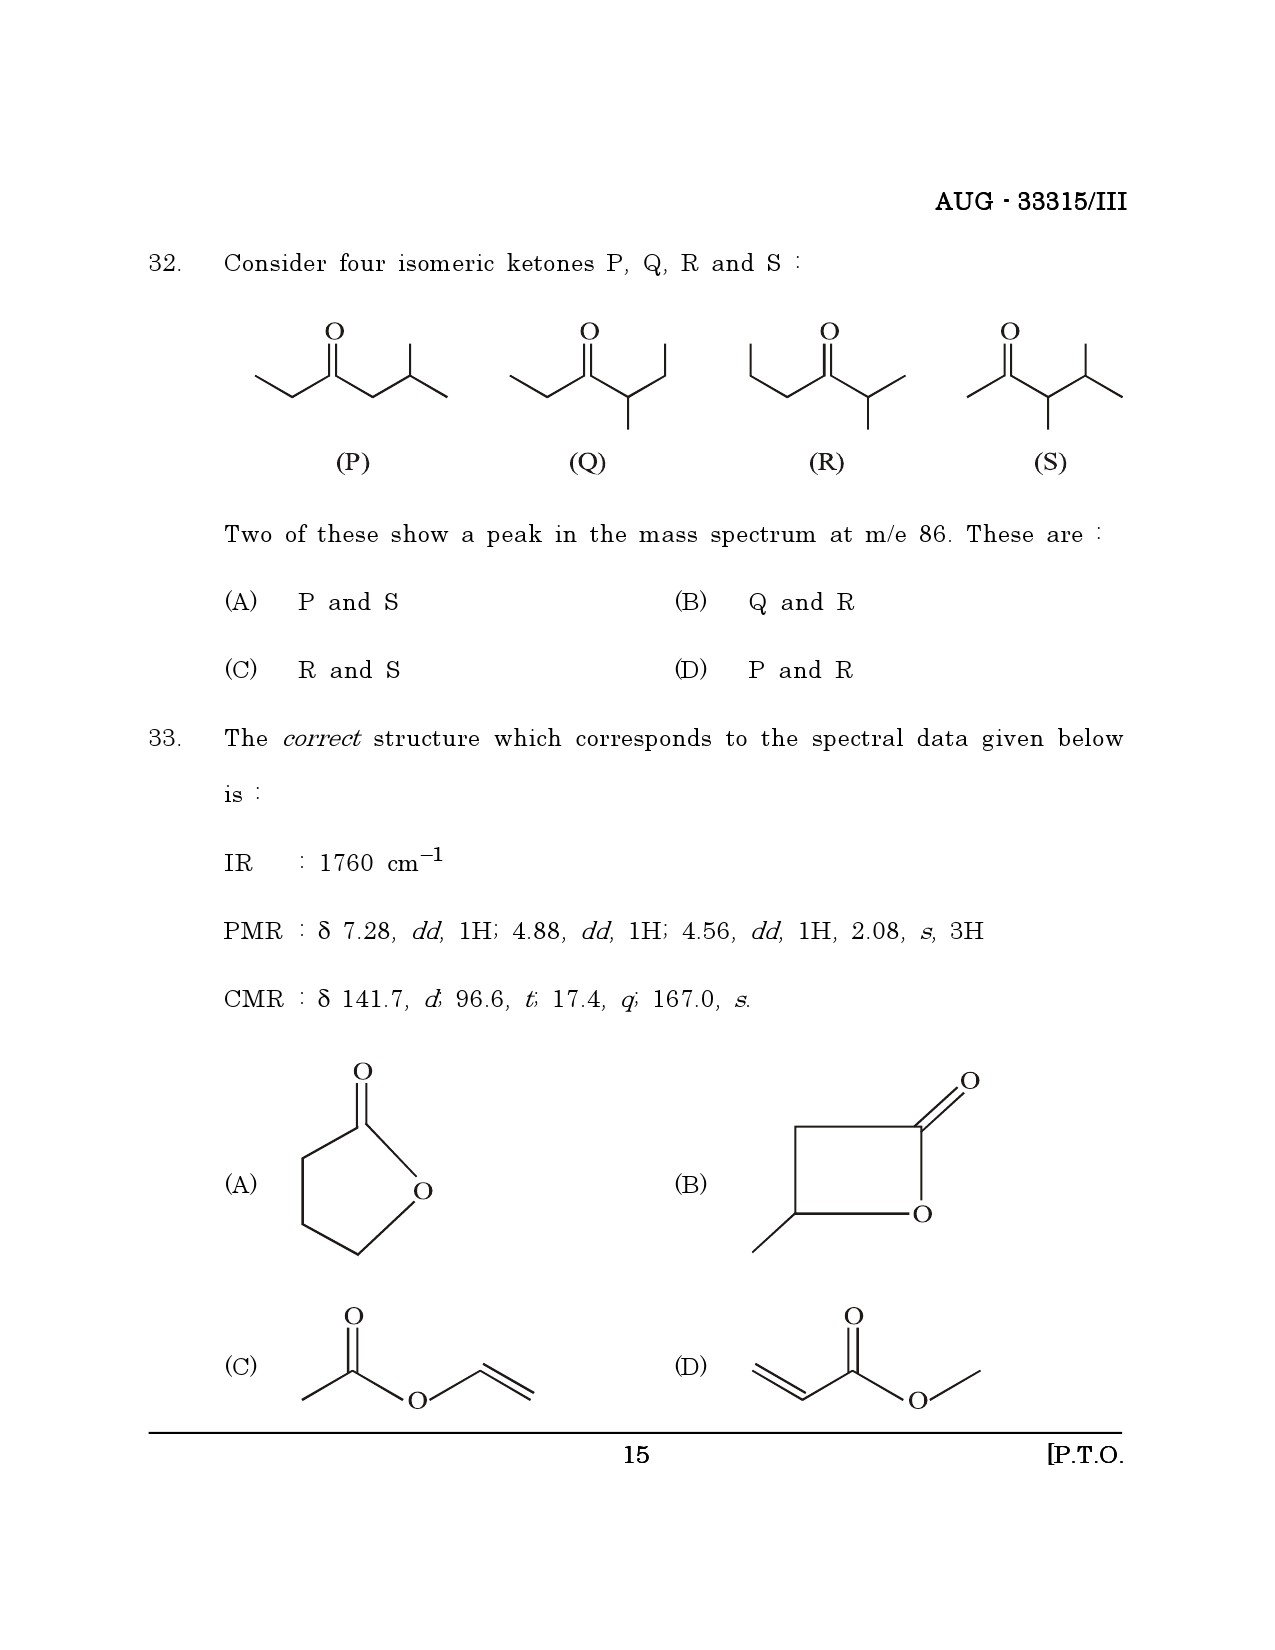 Maharashtra SET Chemical Sciences Question Paper III August 2015 14